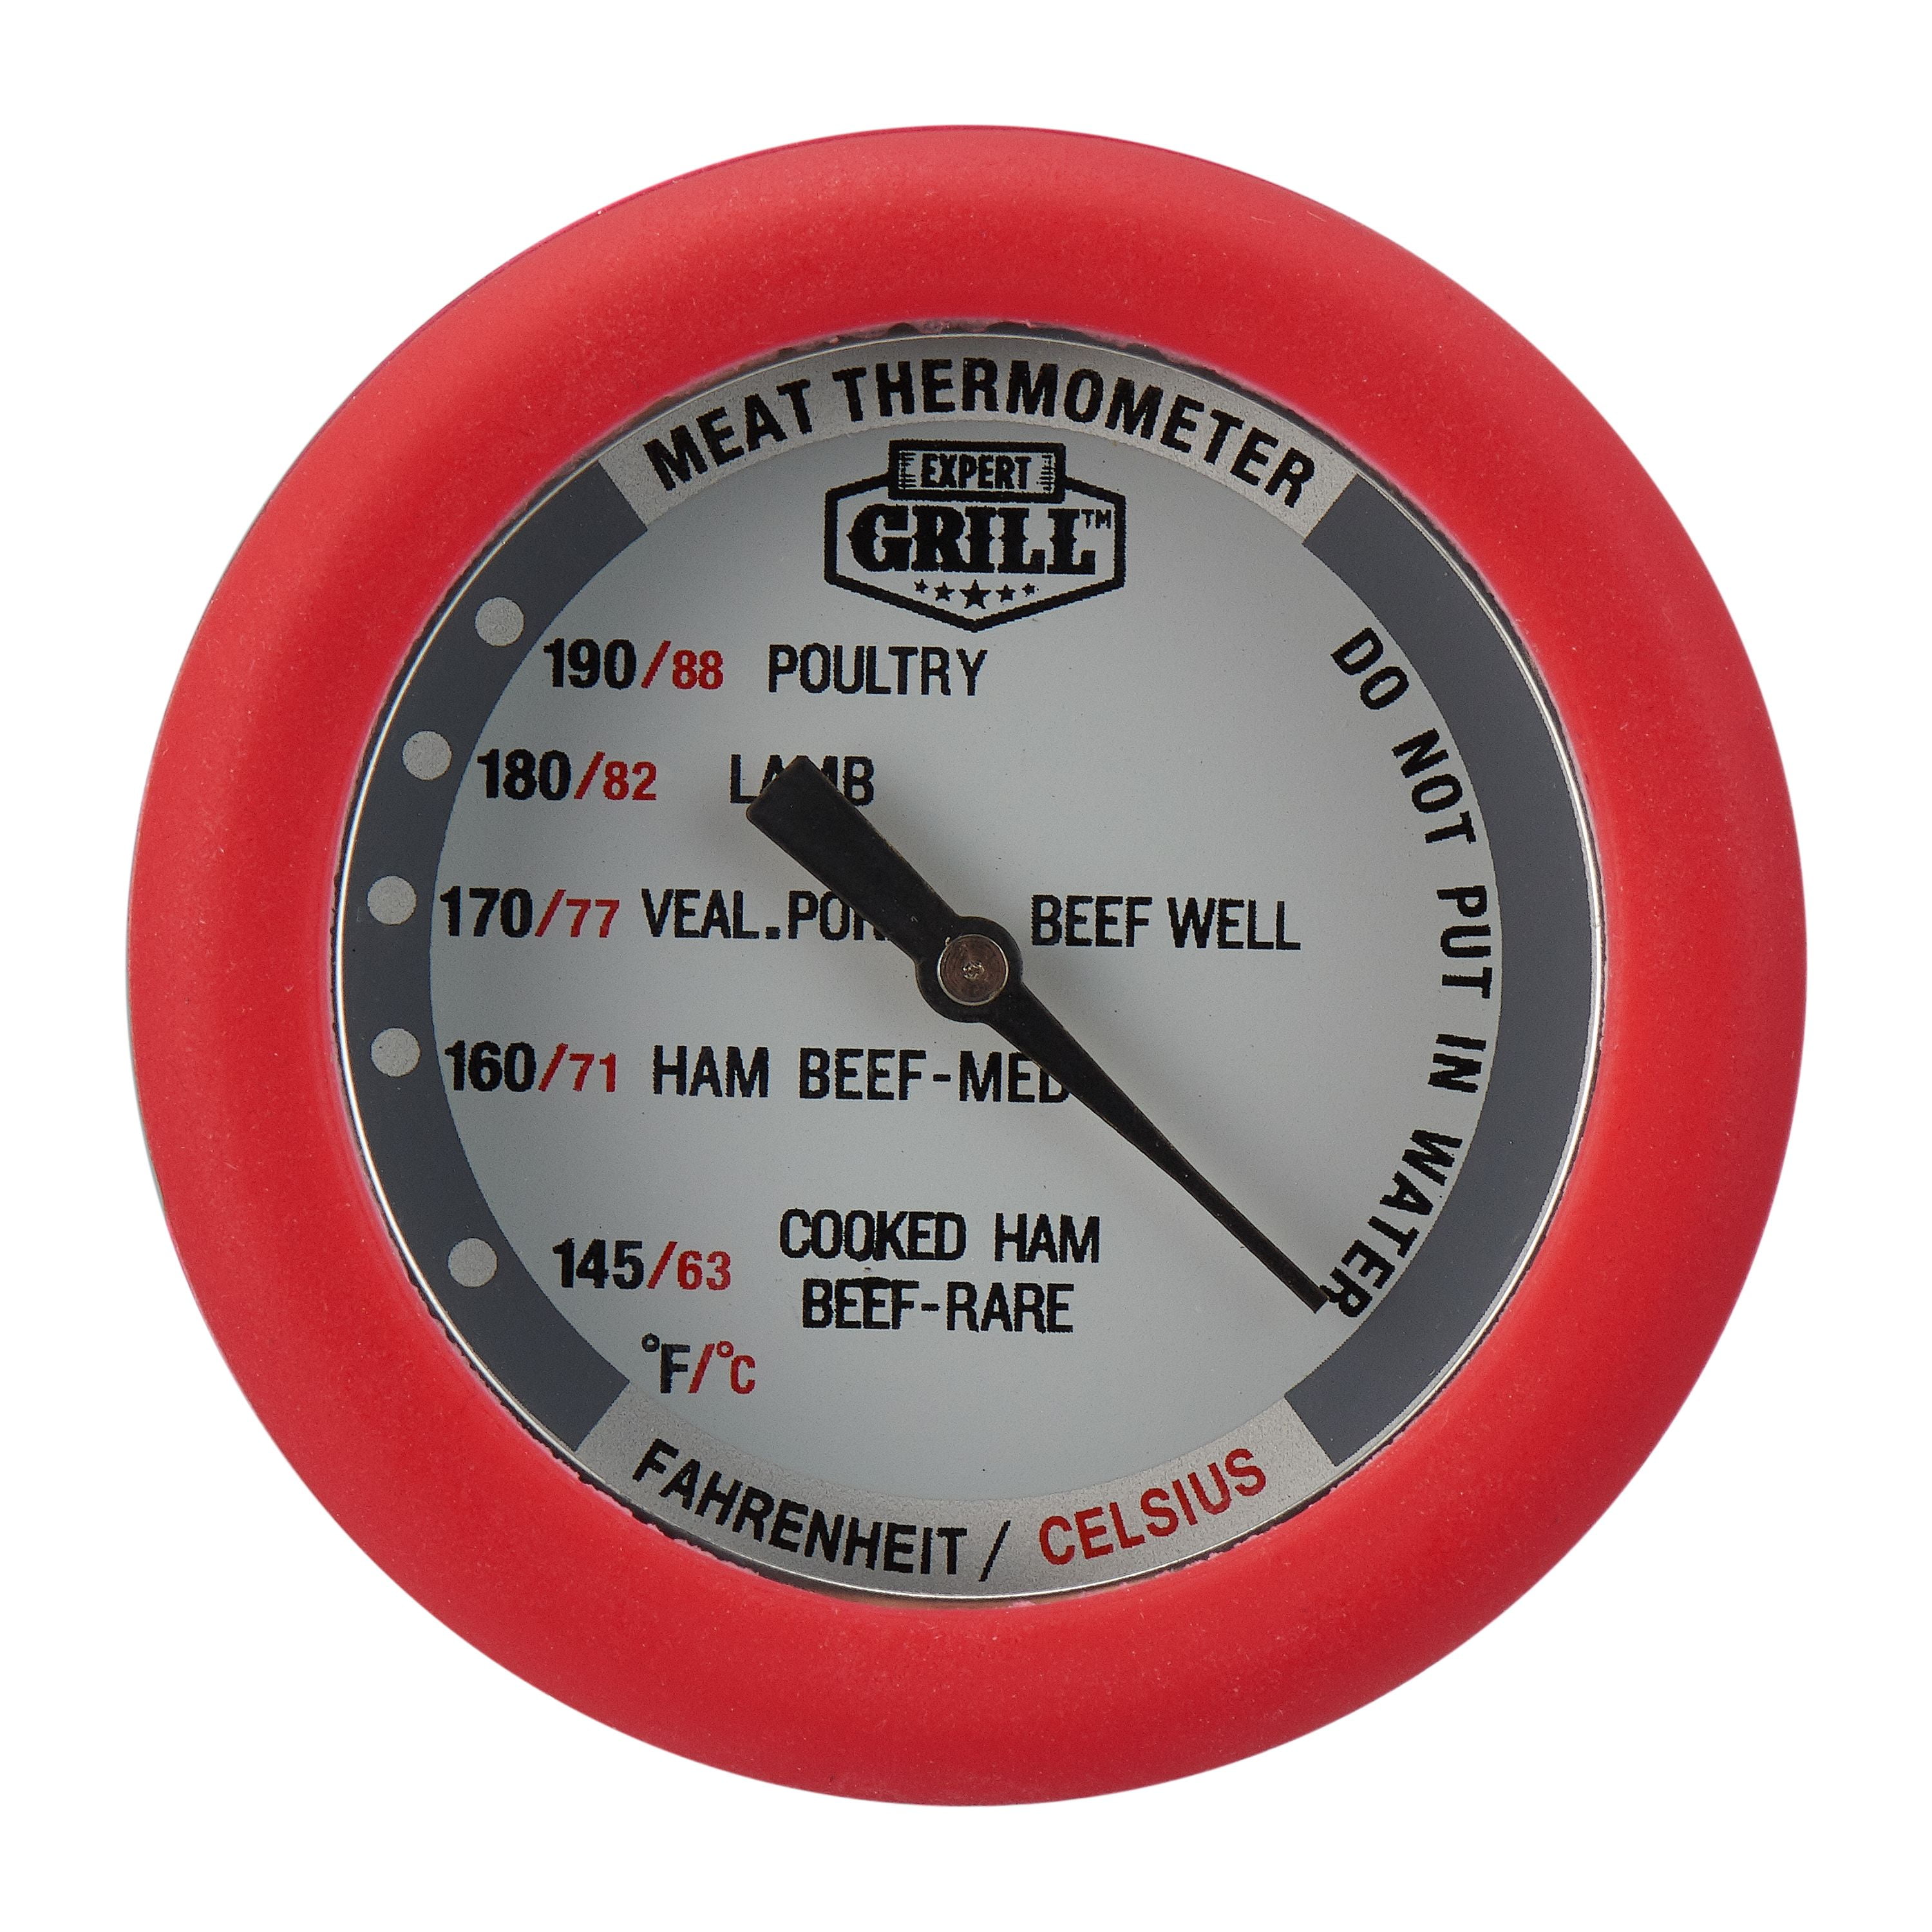 CENTOLLA Meat Thermometer Oven Safe, 2 Pieces Dishwasher Safe Meat Thermometers for Cooking and Grilling, 2.12'' Stainless Steel Cooking Thermometer